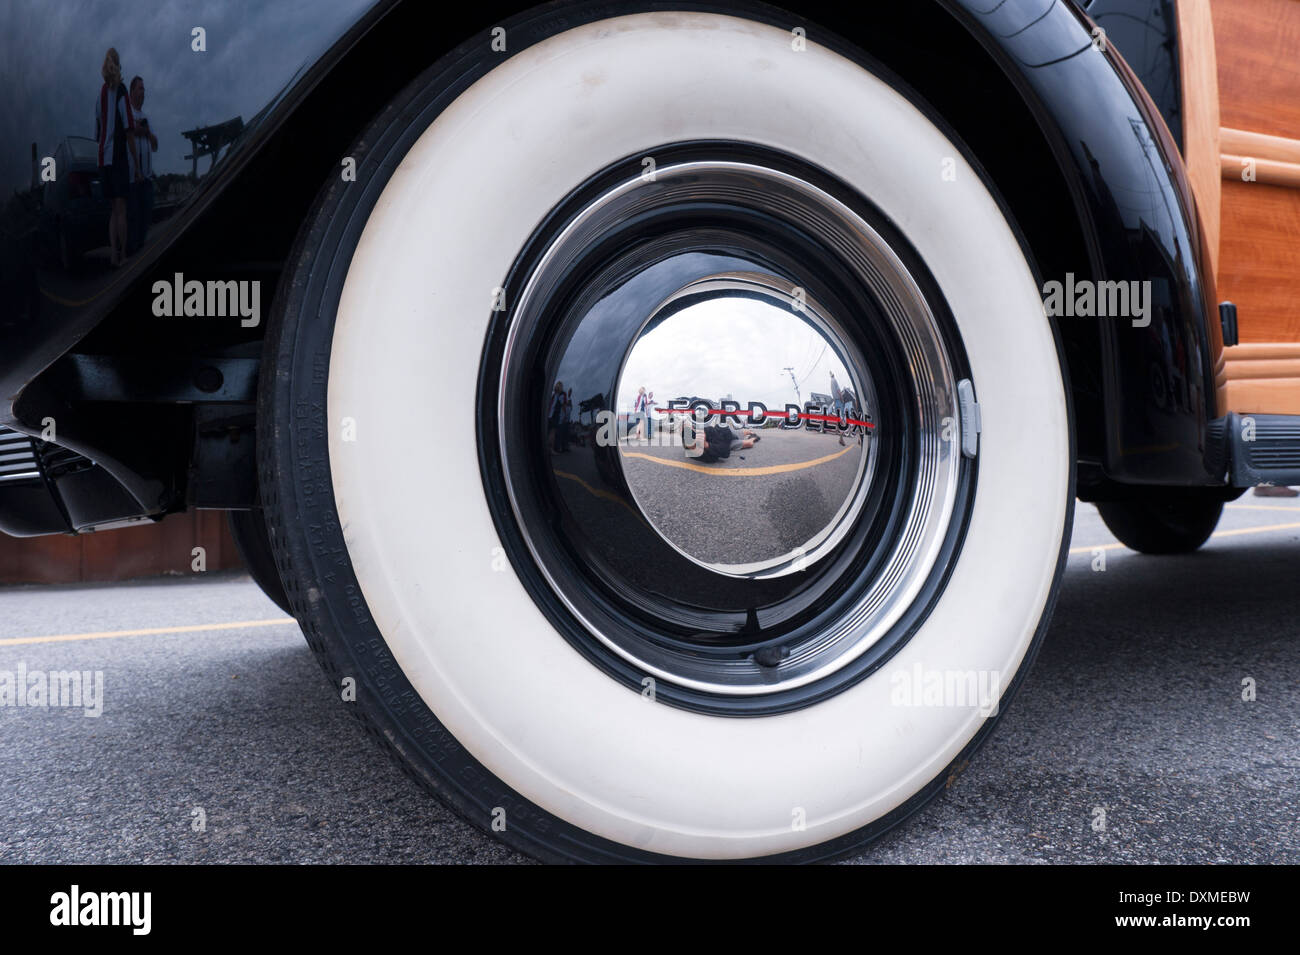 Closeup of a white wall tire on a Ford Deluxe woodie station wagon. Stock Photo